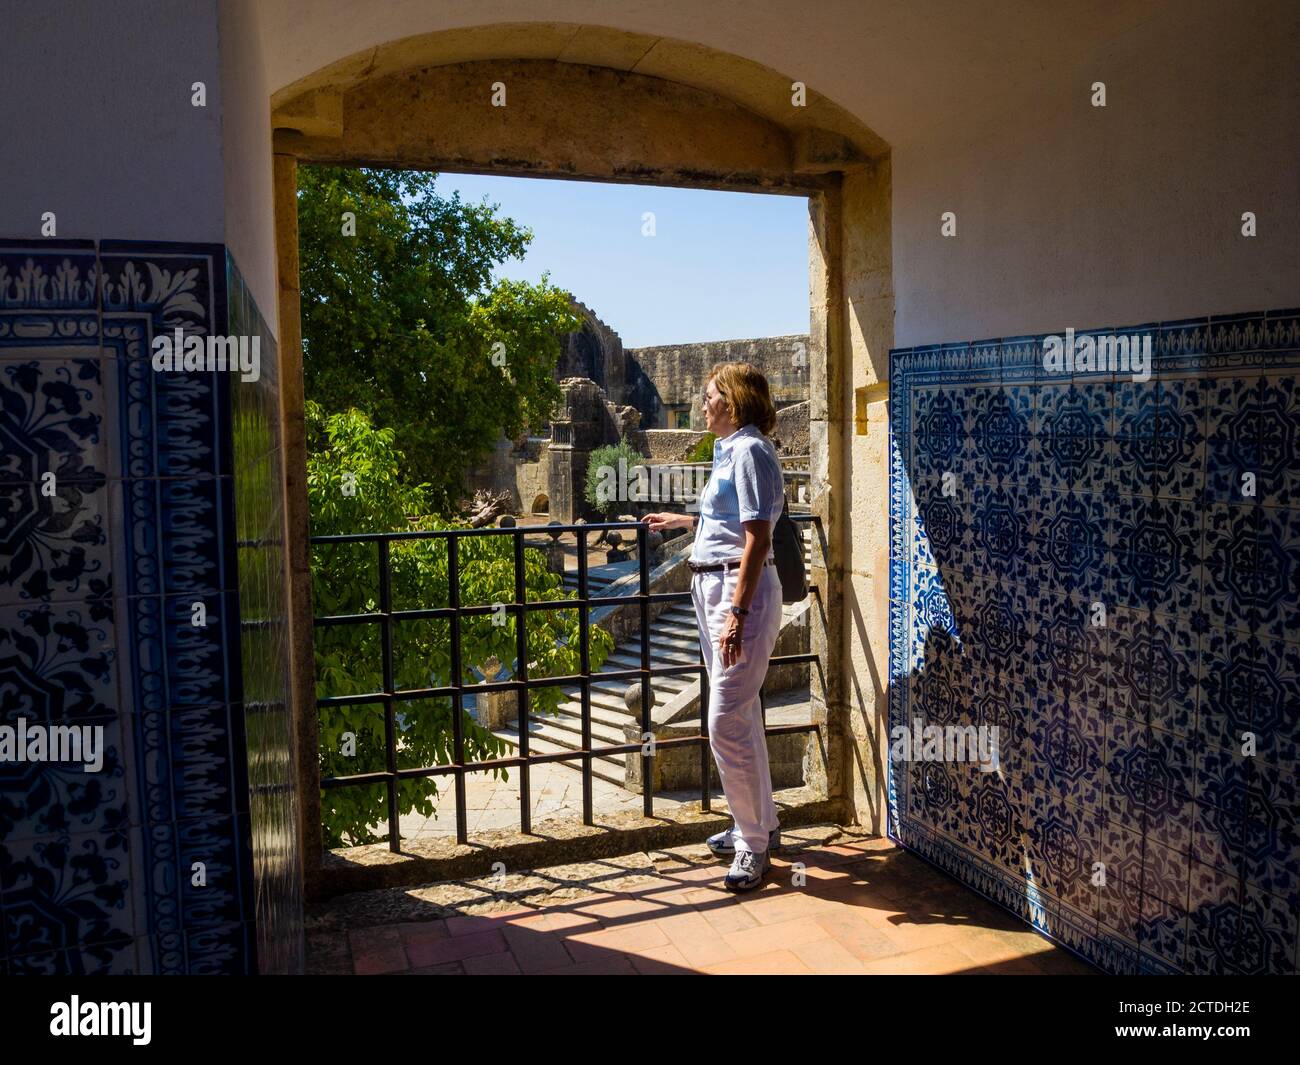 Tourist seeing the external gardens of the Templar Castle in Tomar from an internal window decorated with hand painted tiles. Tomar - Portugal Stock Photo